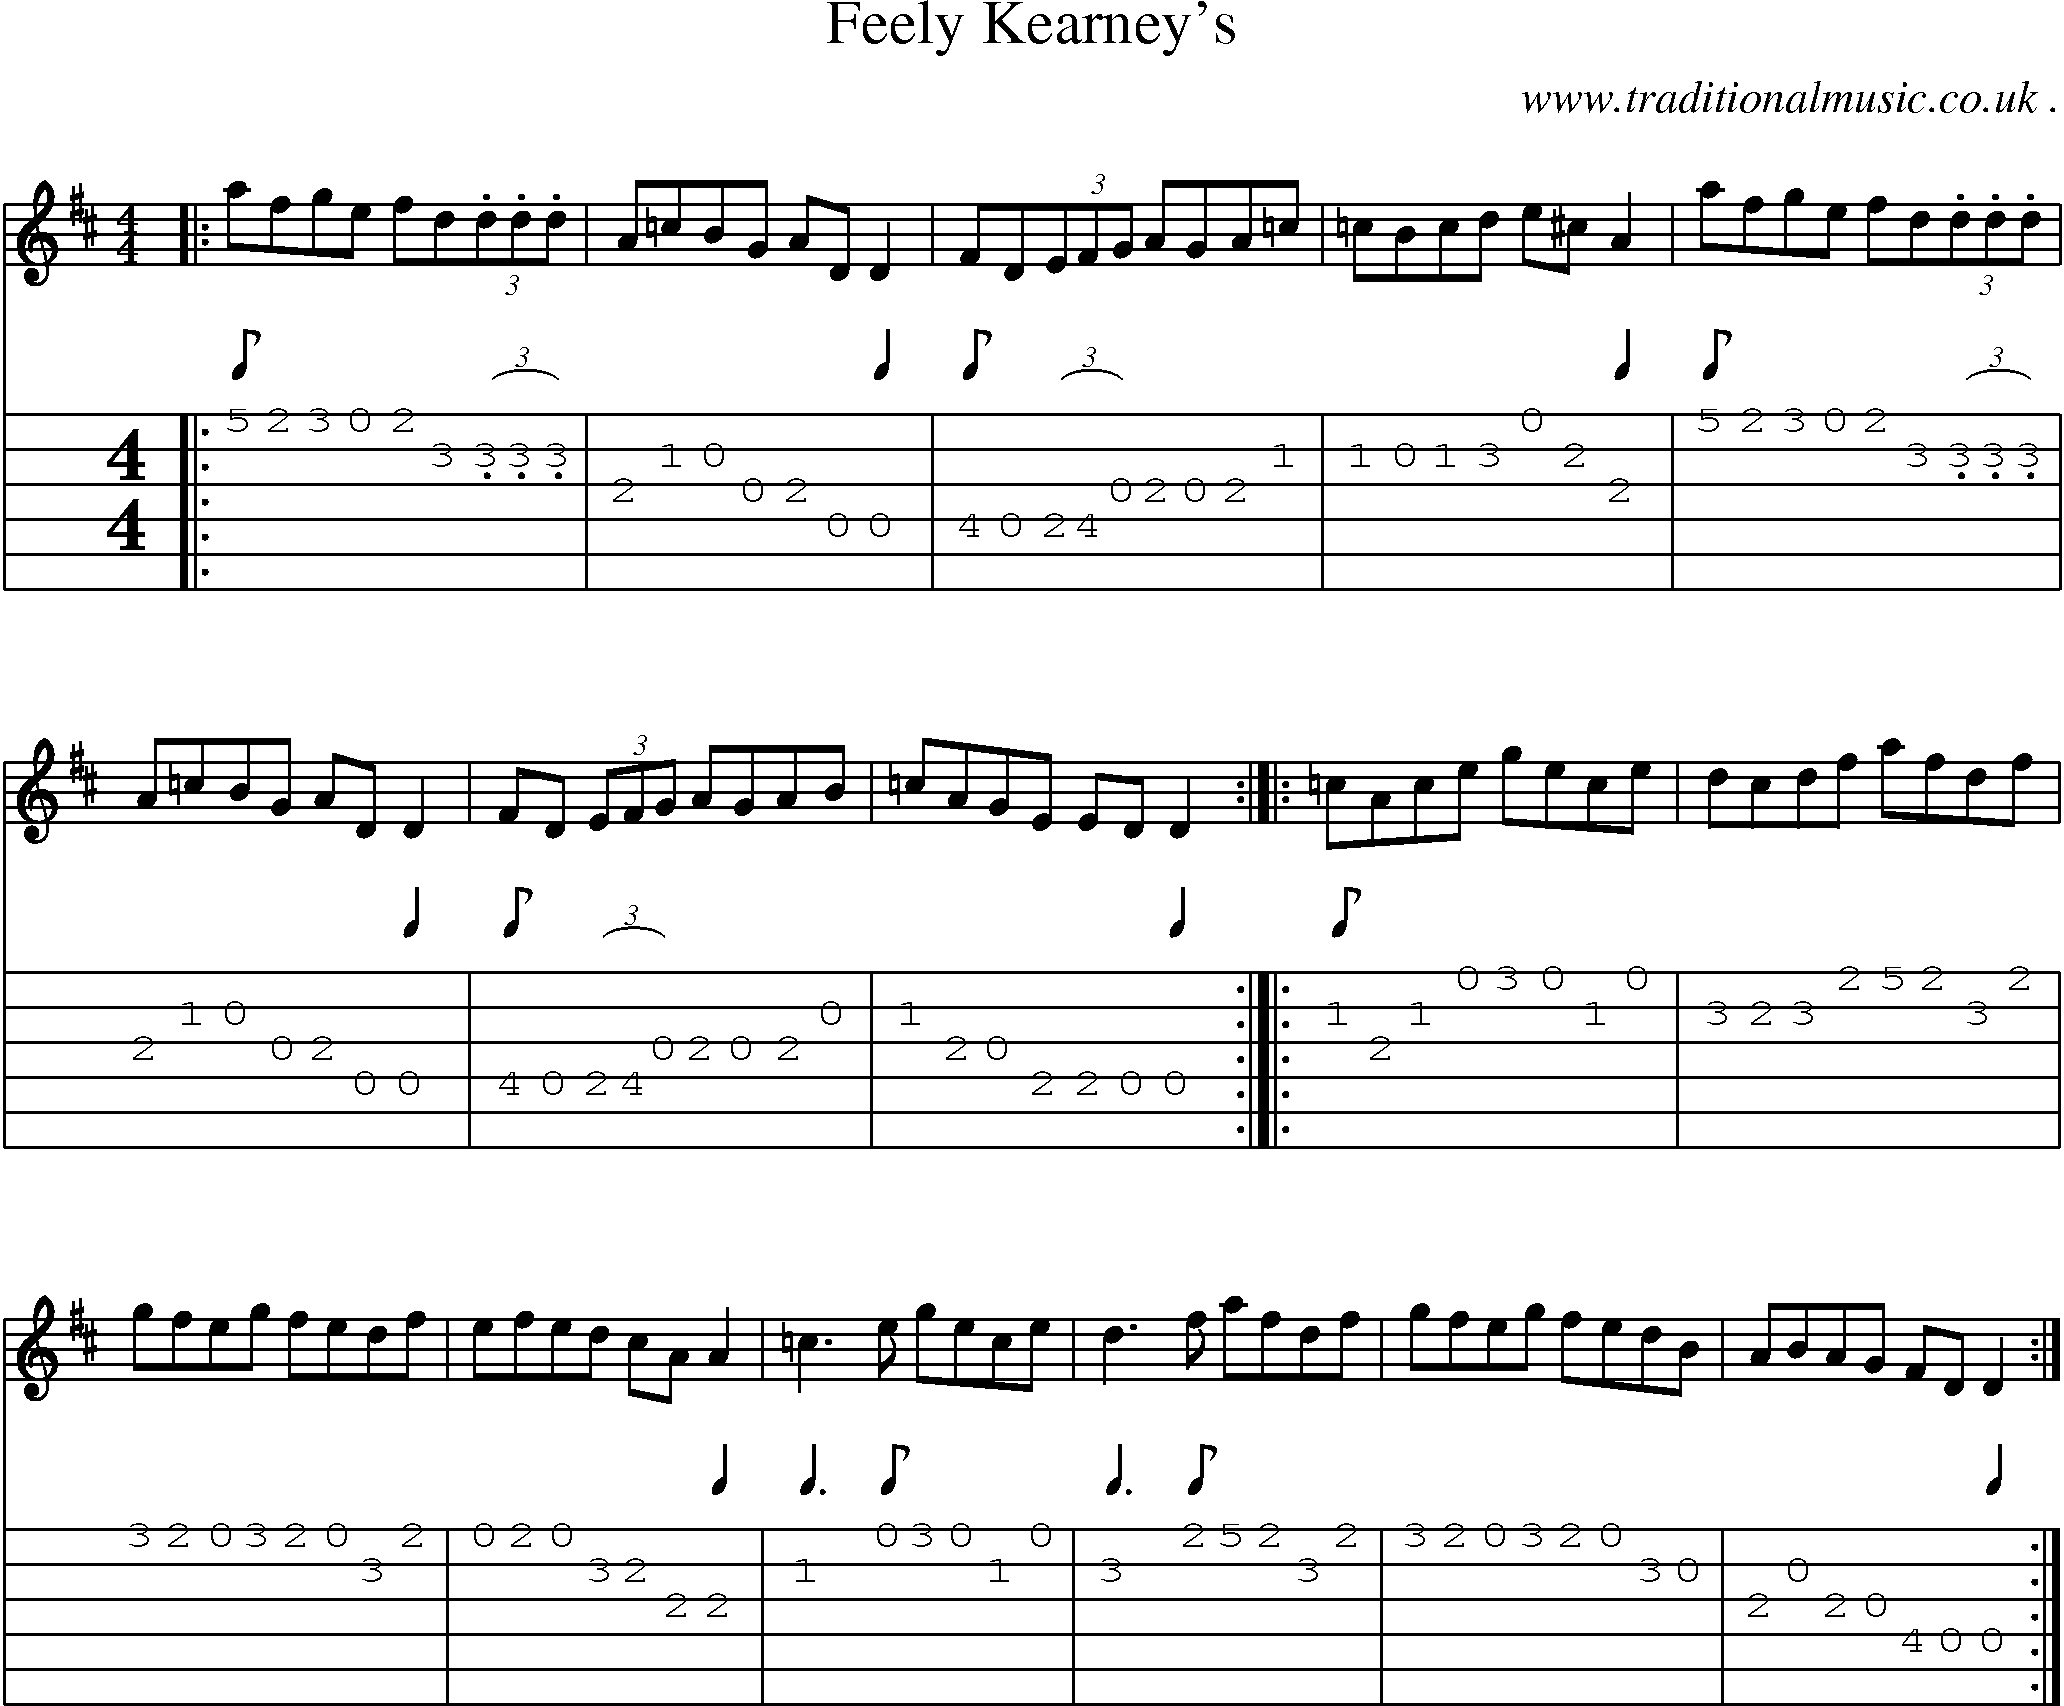 Sheet-Music and Guitar Tabs for Feely Kearneys